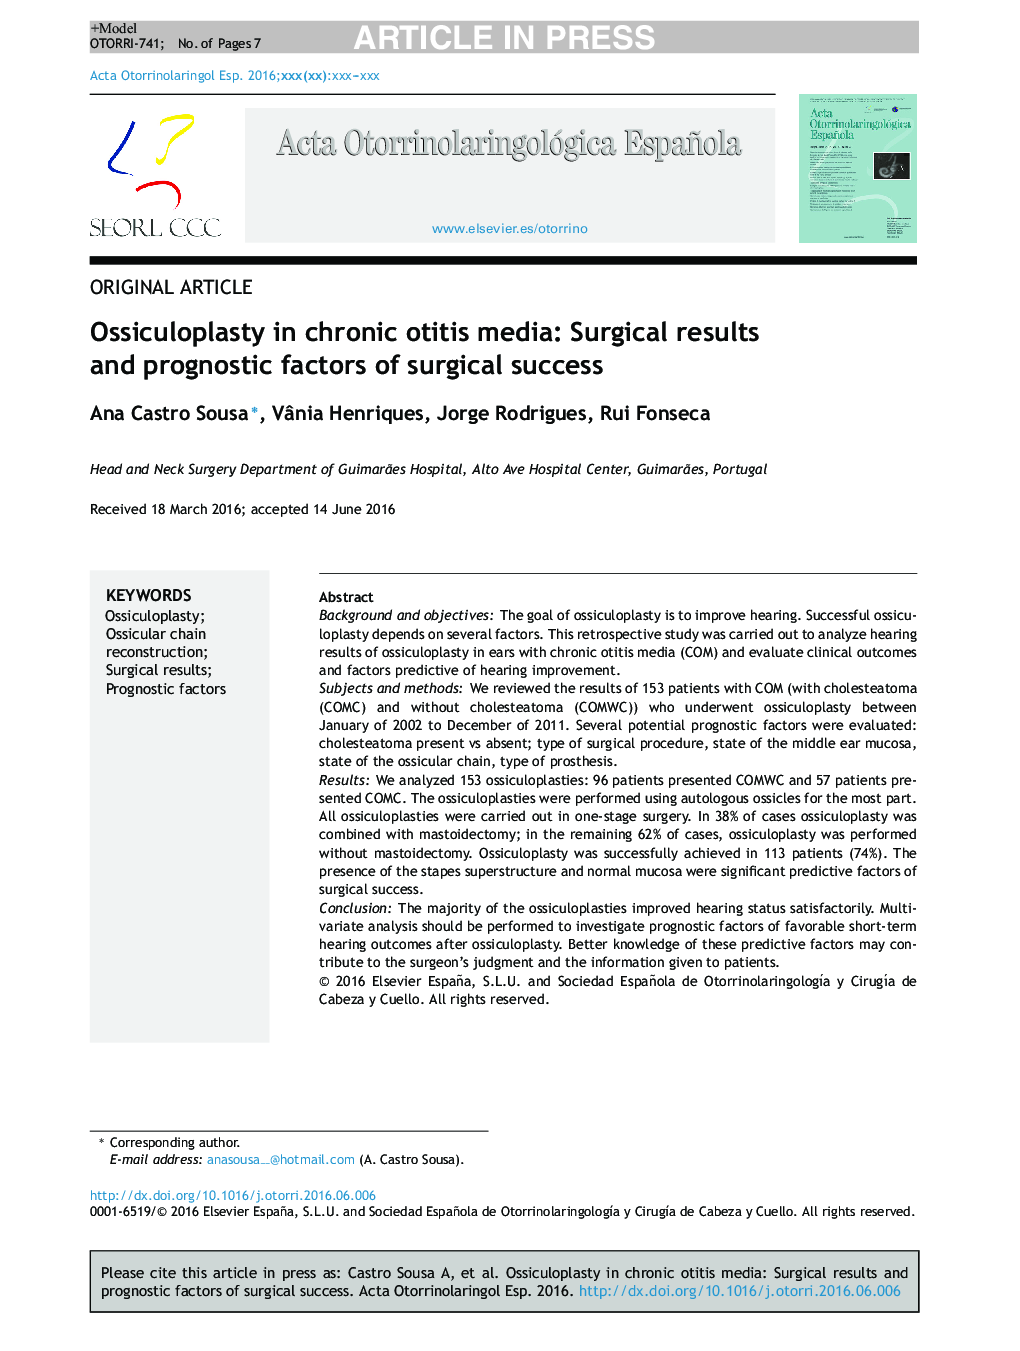 Ossiculoplasty in chronic otitis media: Surgical results and prognostic factors of surgical success